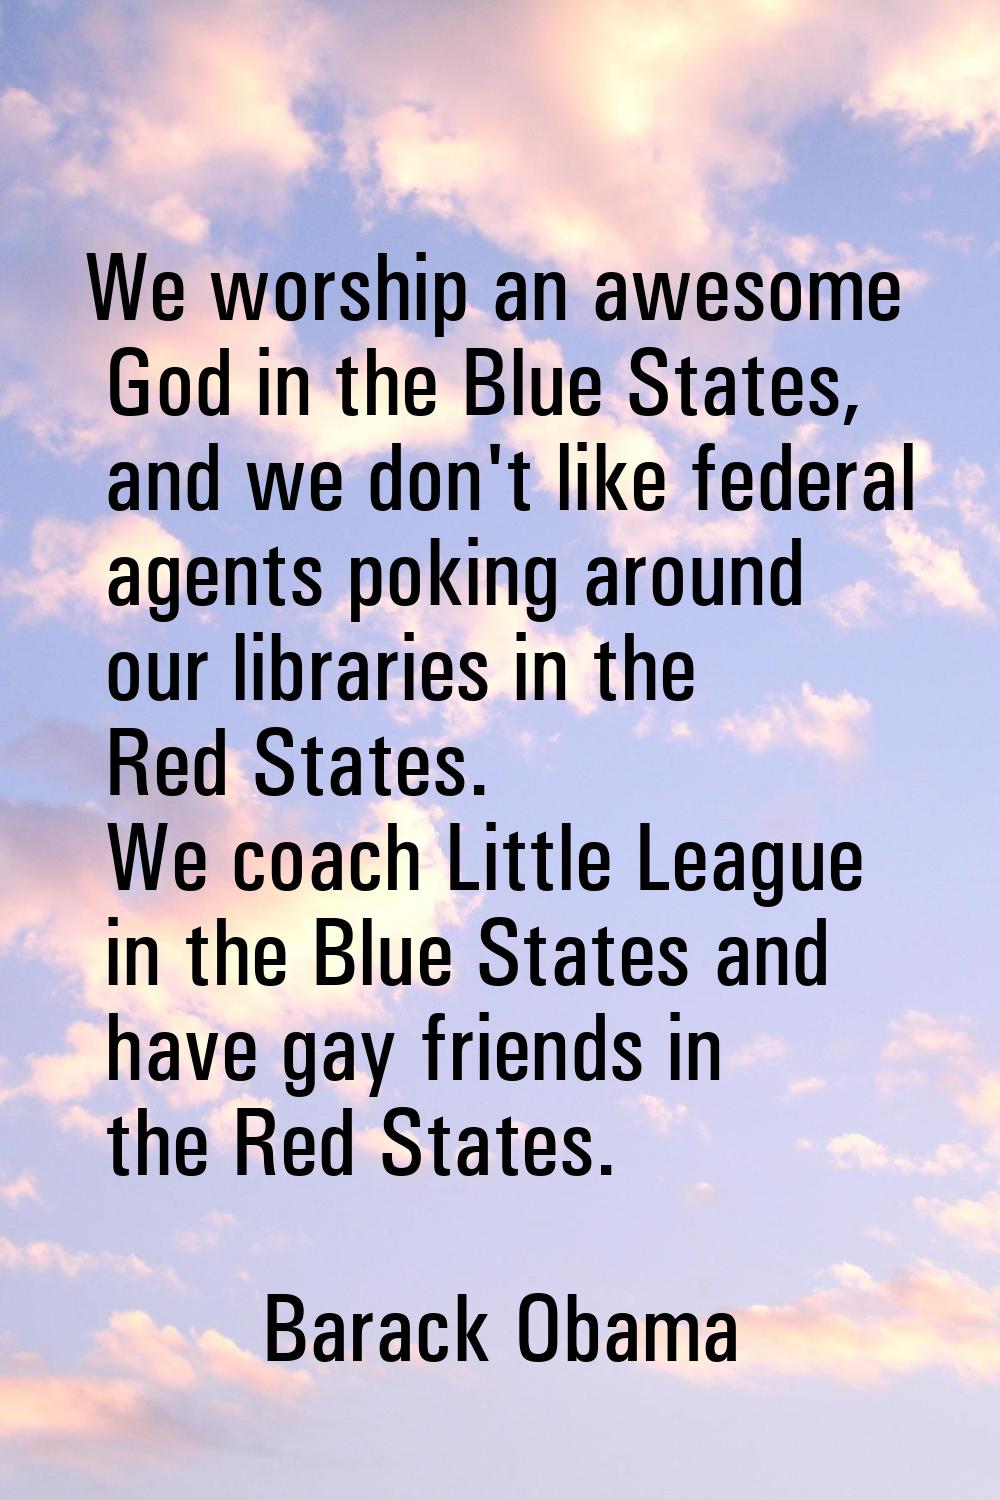 We worship an awesome God in the Blue States, and we don't like federal agents poking around our li